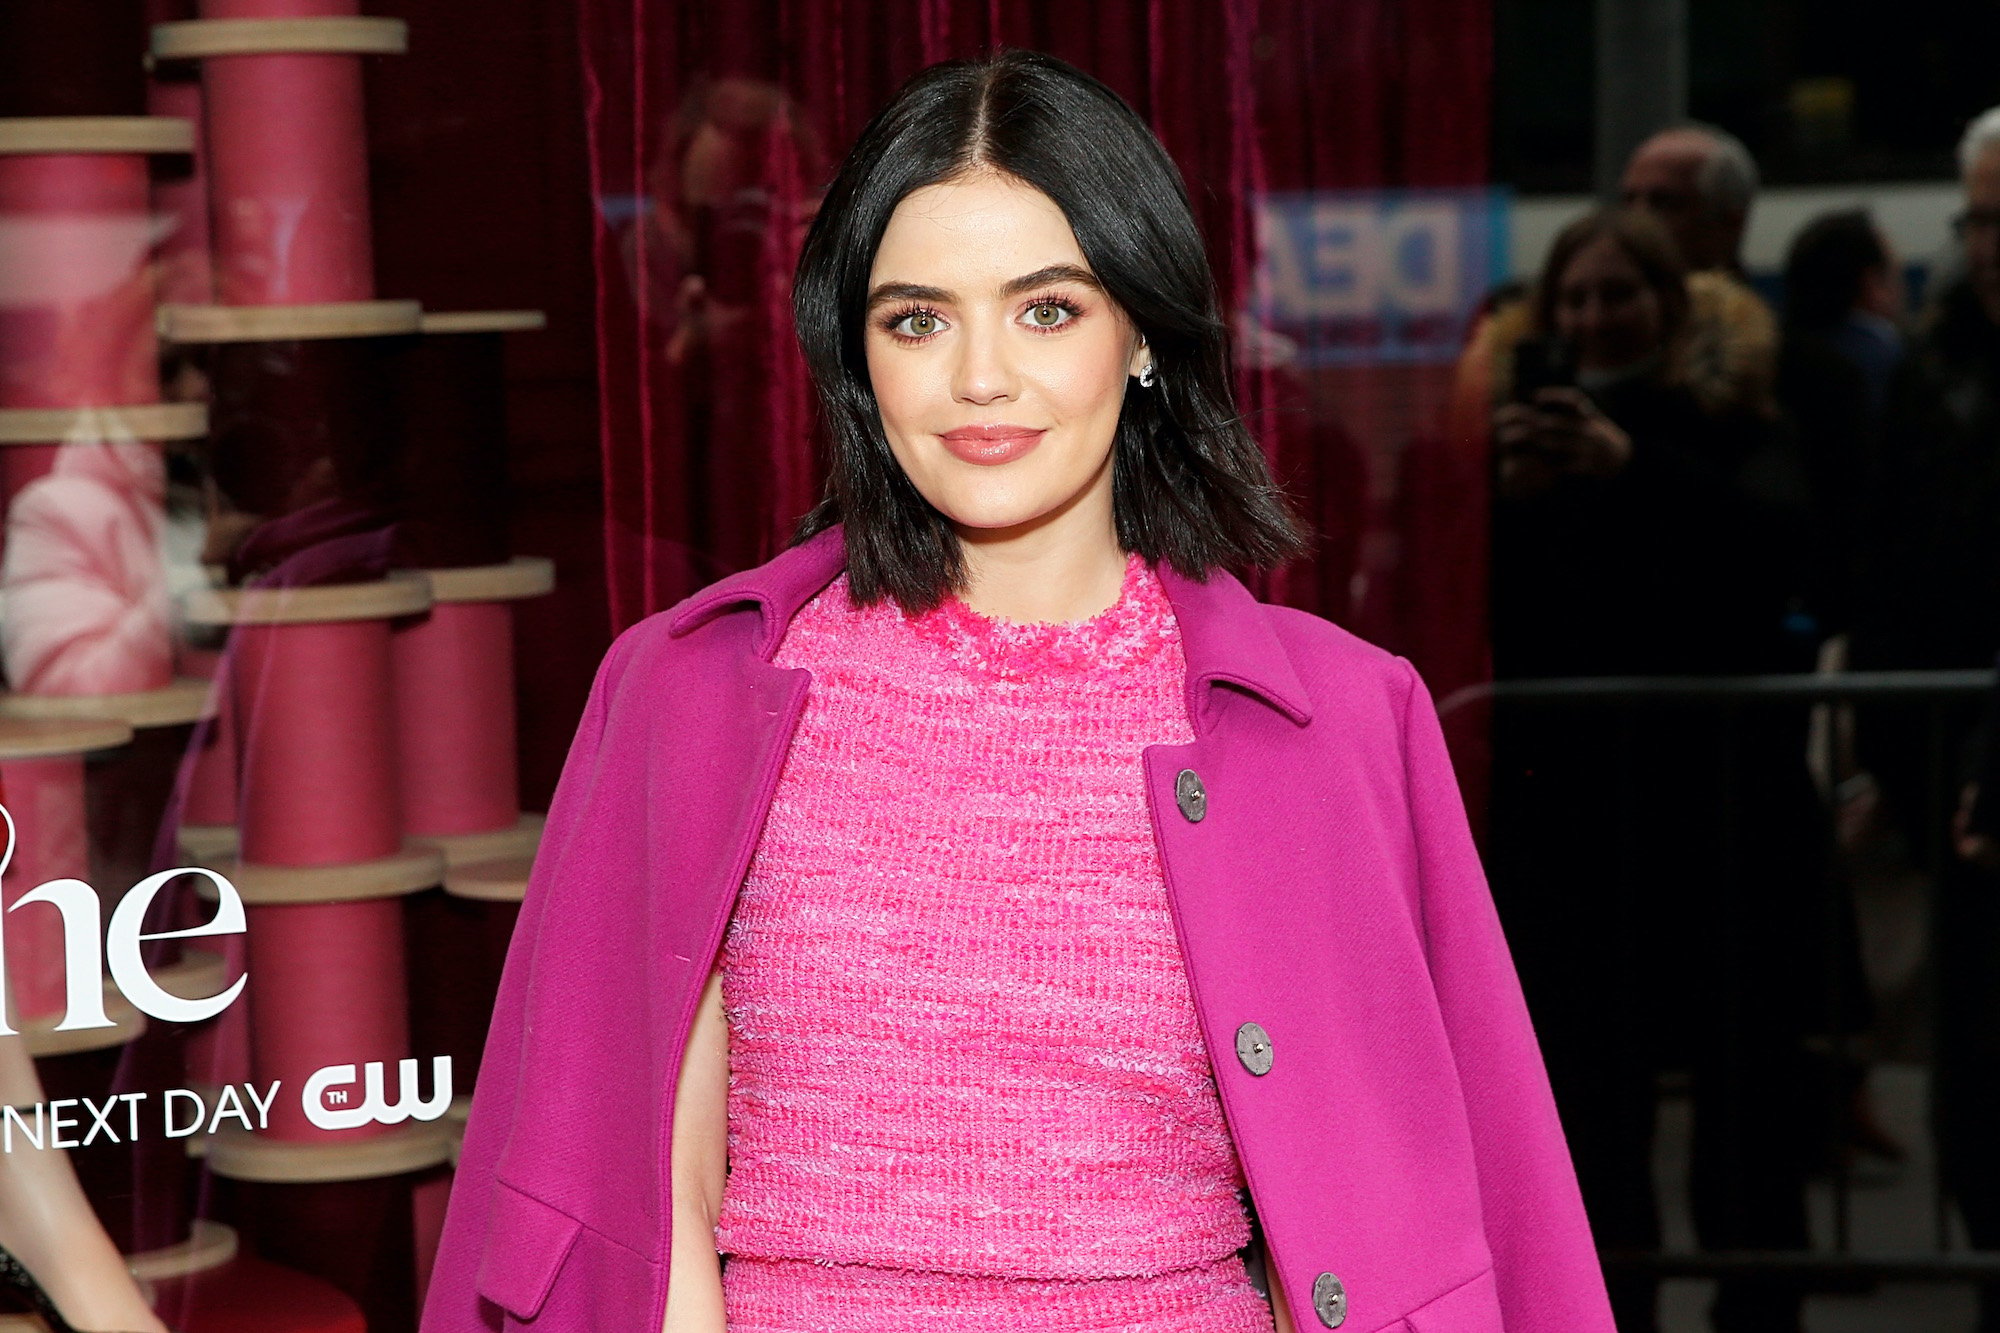 What is Lucy Hale’s Real Name?